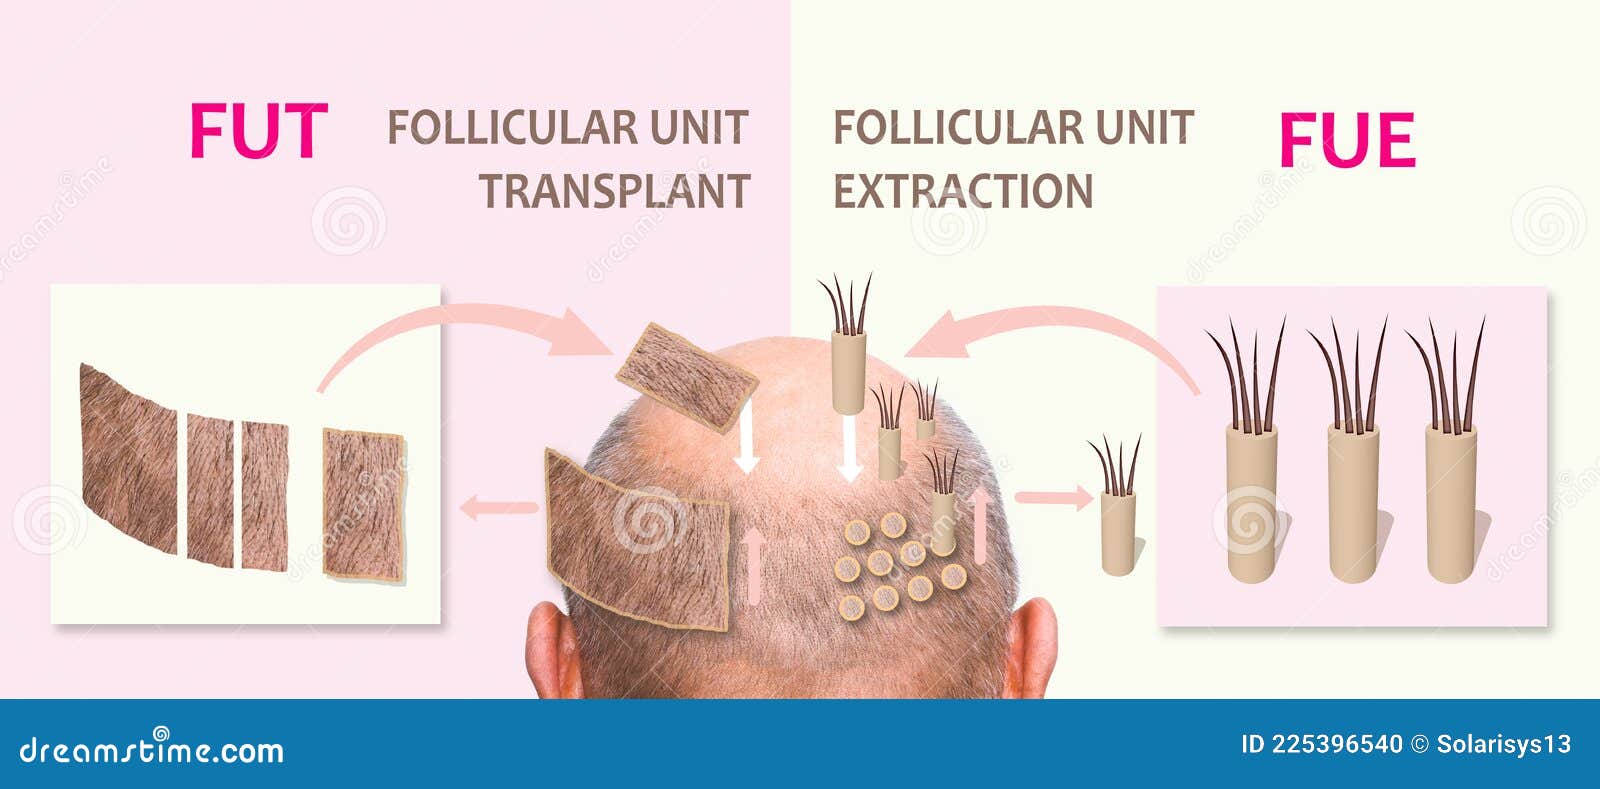 methods of hair transplantation fut vs fue with infographic s of .